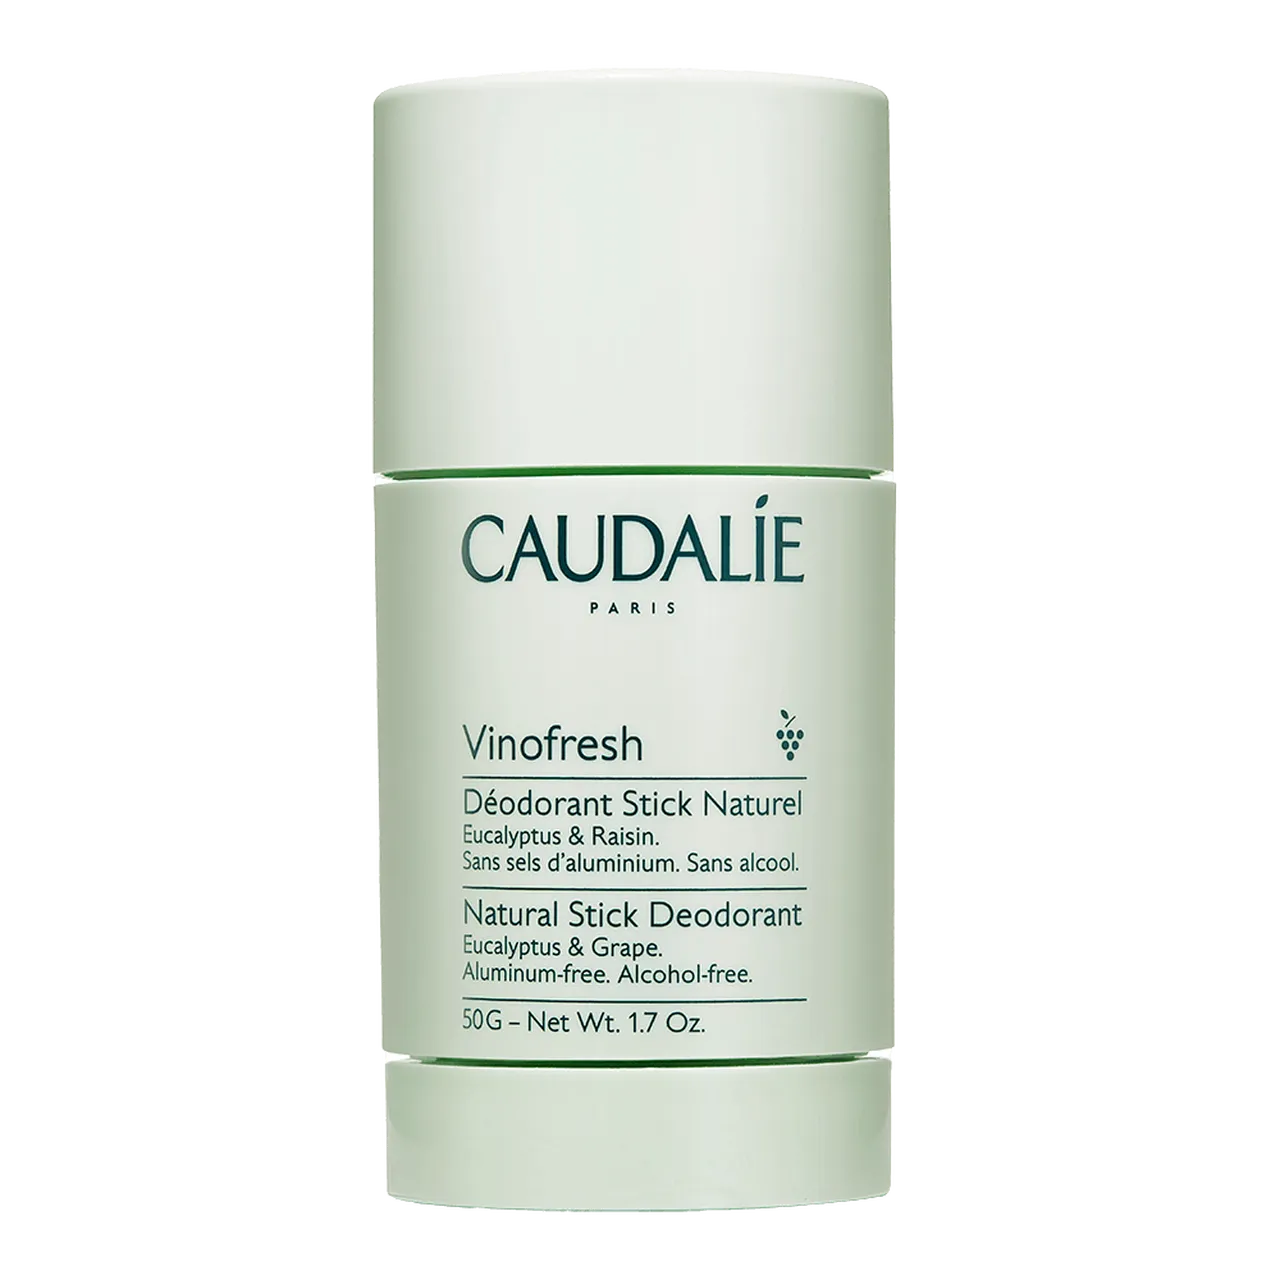 Vinofresh Natural Deodorant by Caudalie, one of the best French natural deodorants.